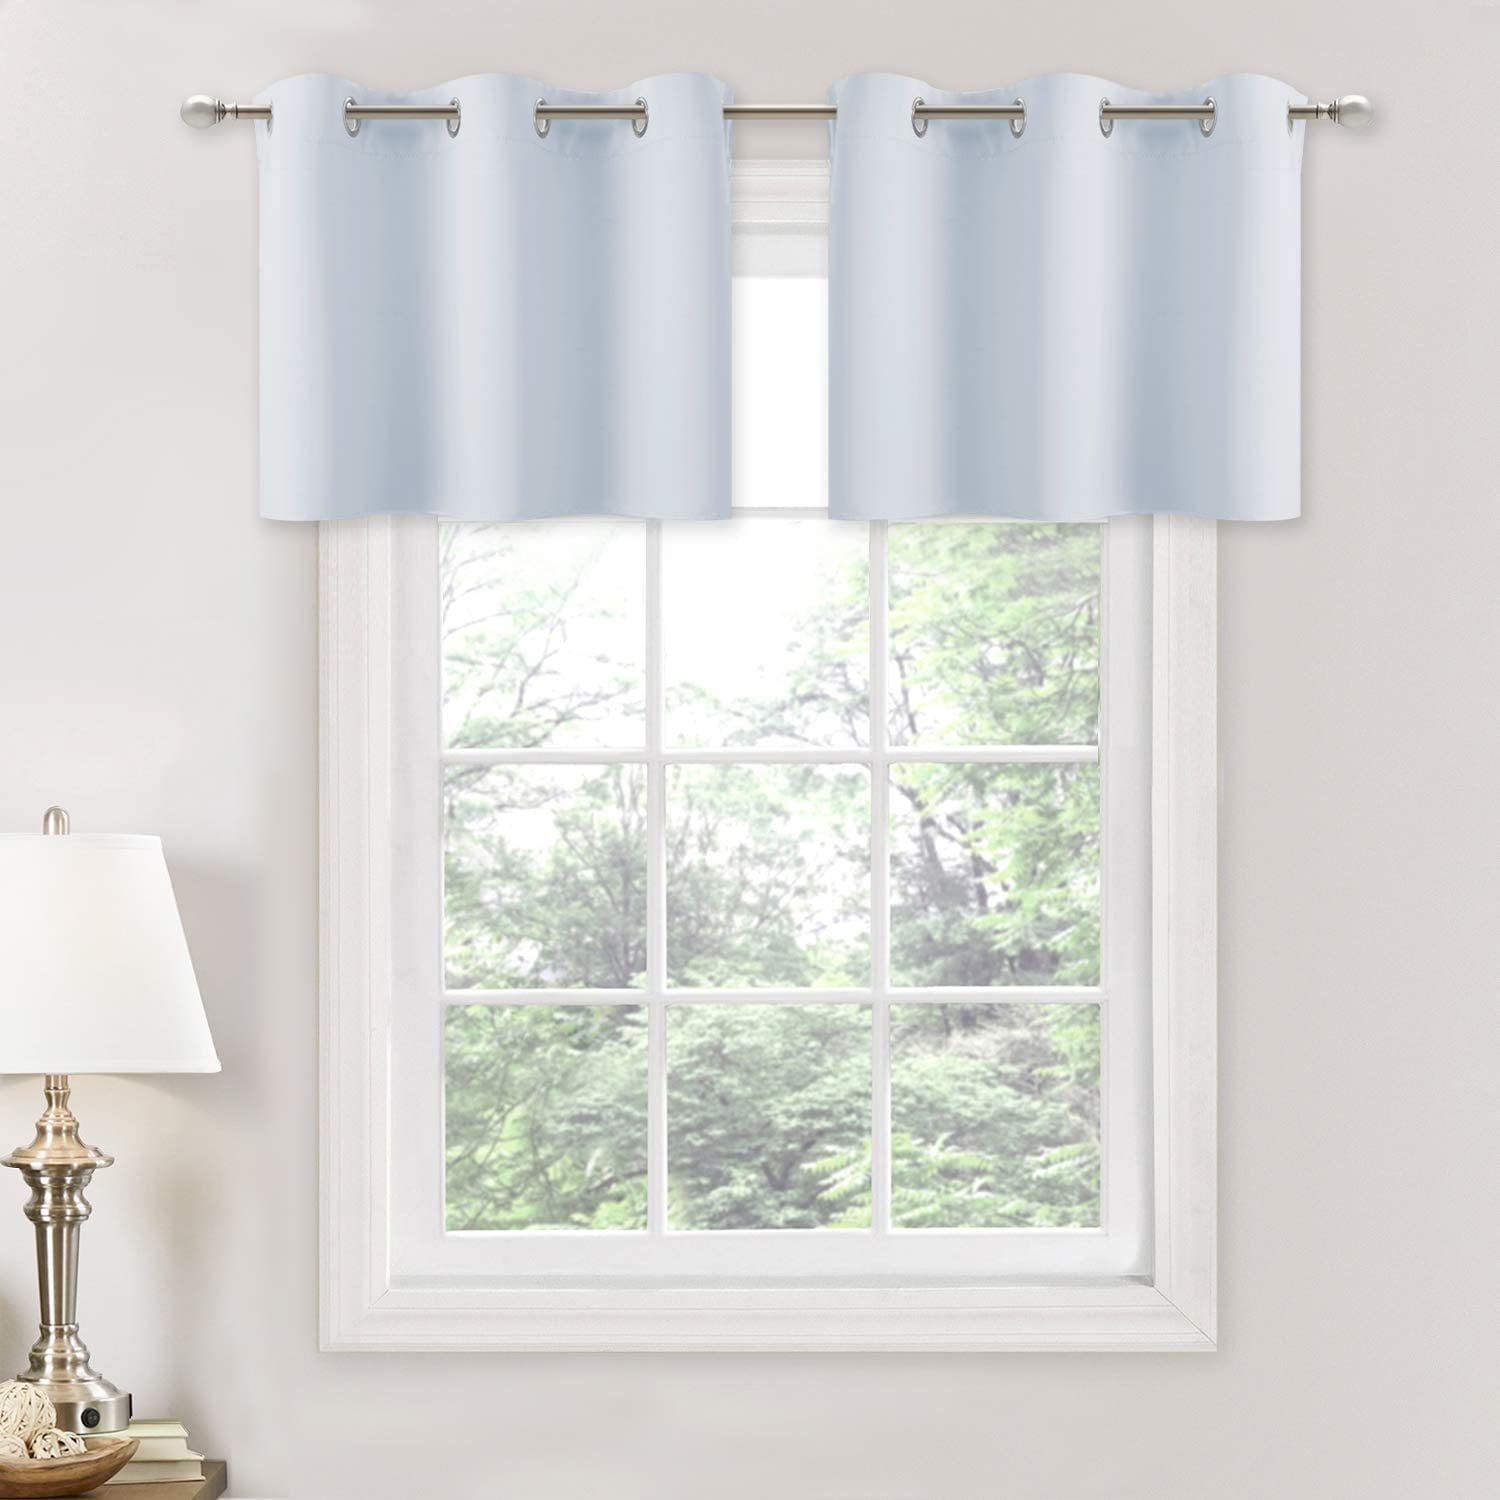 NICETOWN Sheer Window Valances for Decoration Linen-Like Privacy Protecting Casual Bedroom Window Tier Draperies W52 x L36, Dark Grey, 2 Pcs